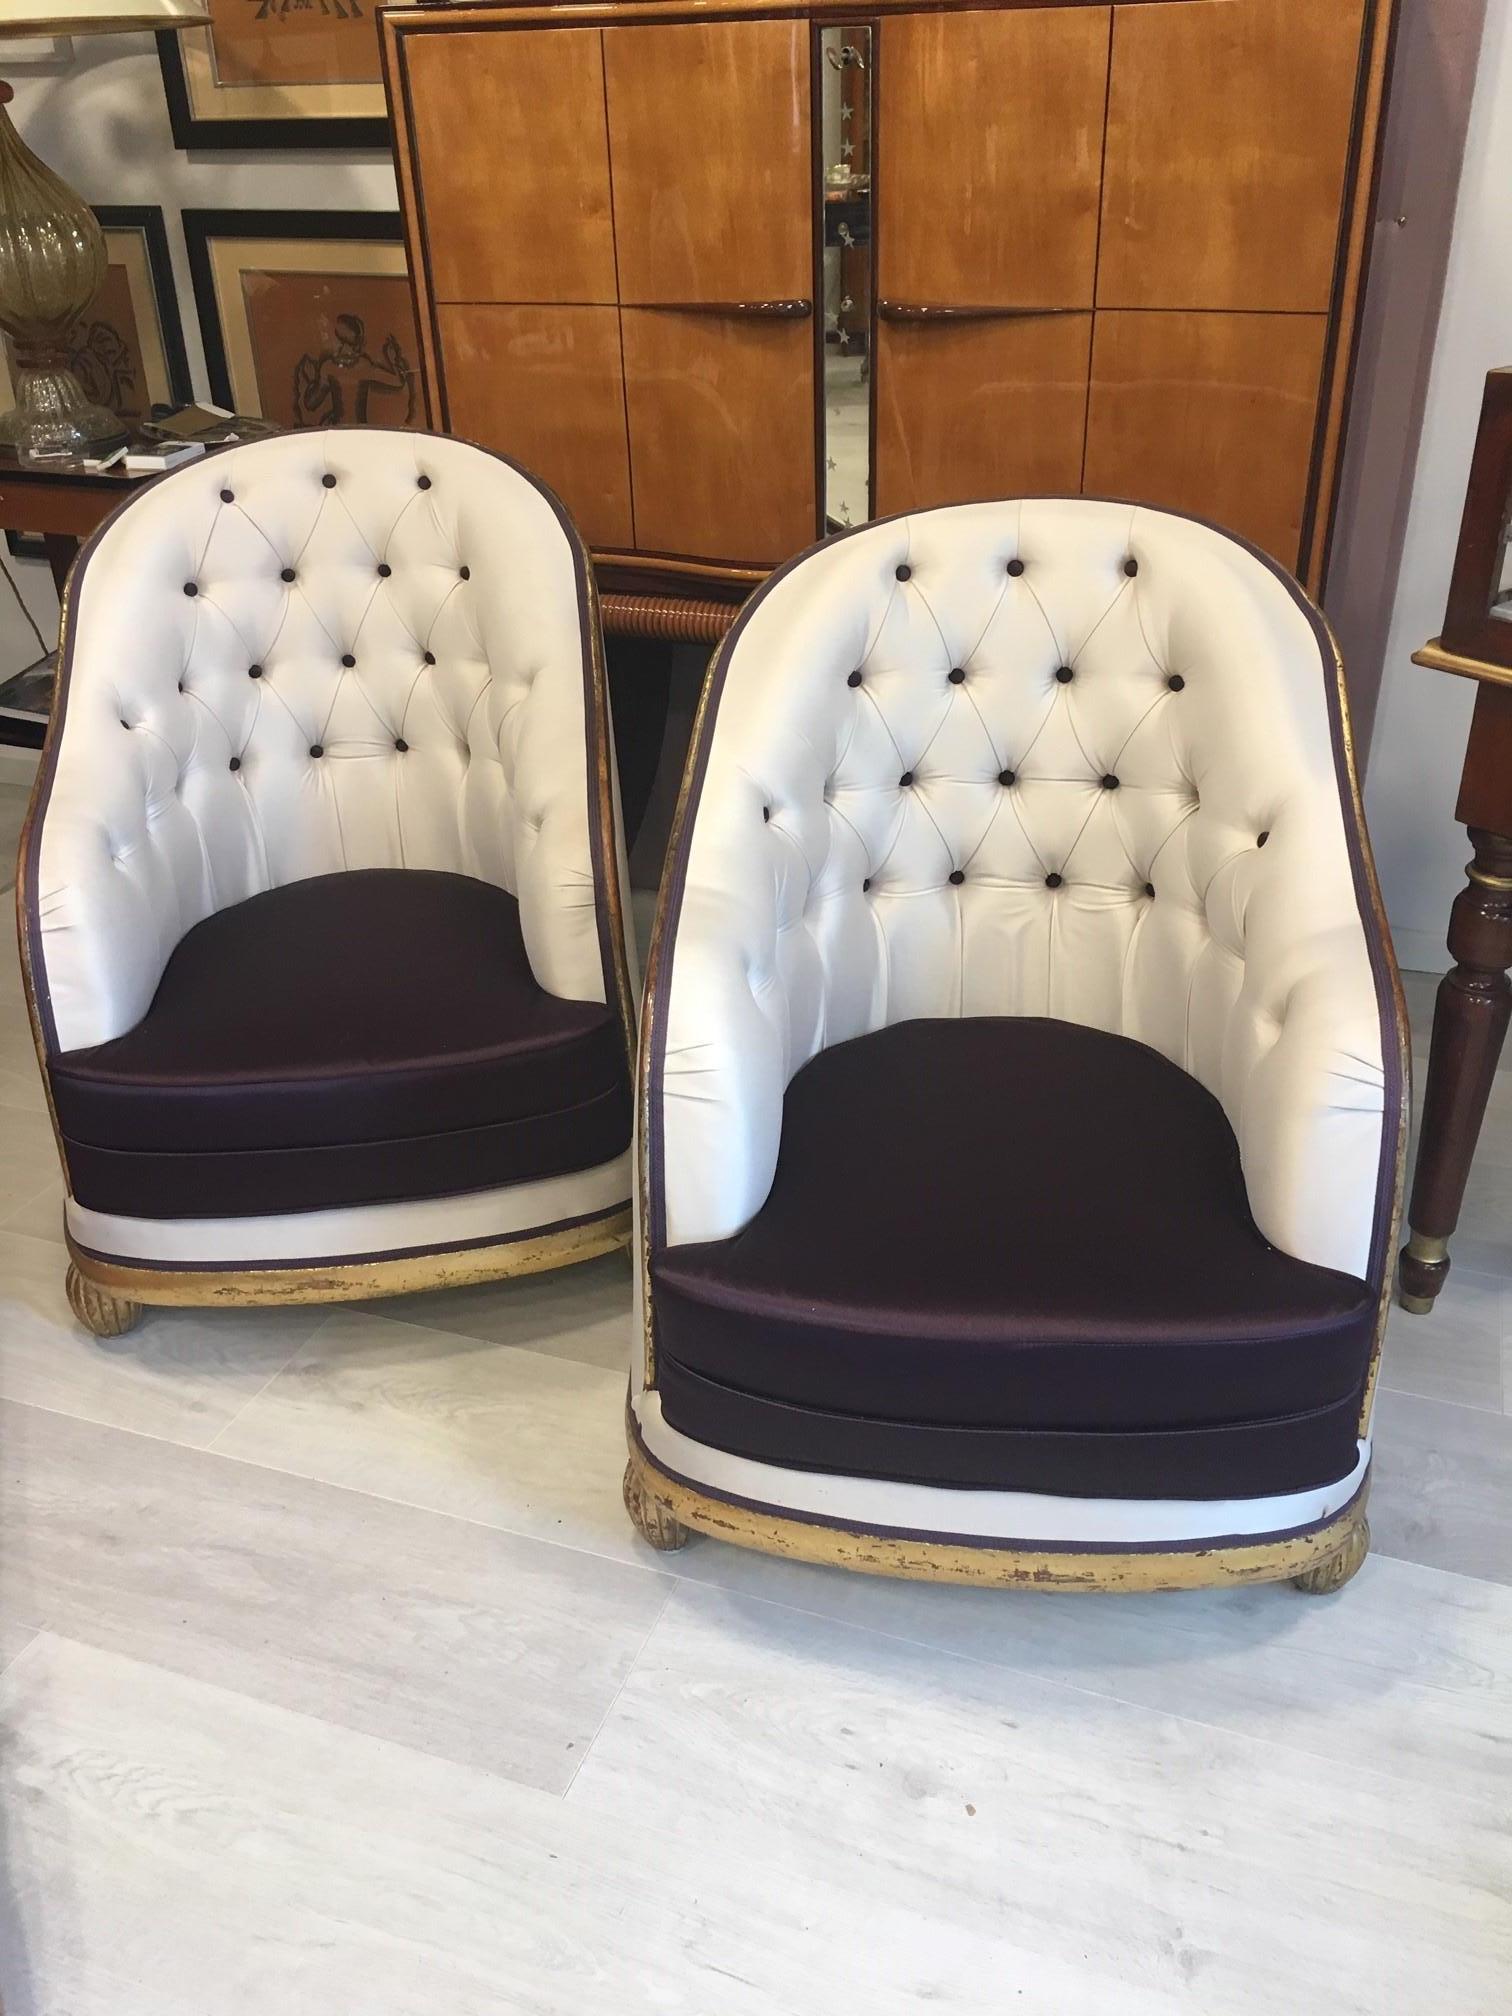 Extraordinary Paul Follot Art Deco armchairs from the 1920s are made of carved and gilded wood. 
The chairs have a wide, curved backrest that extends over solid armrests and rests on legs. 
The lines impress with the high back and the ribbed,